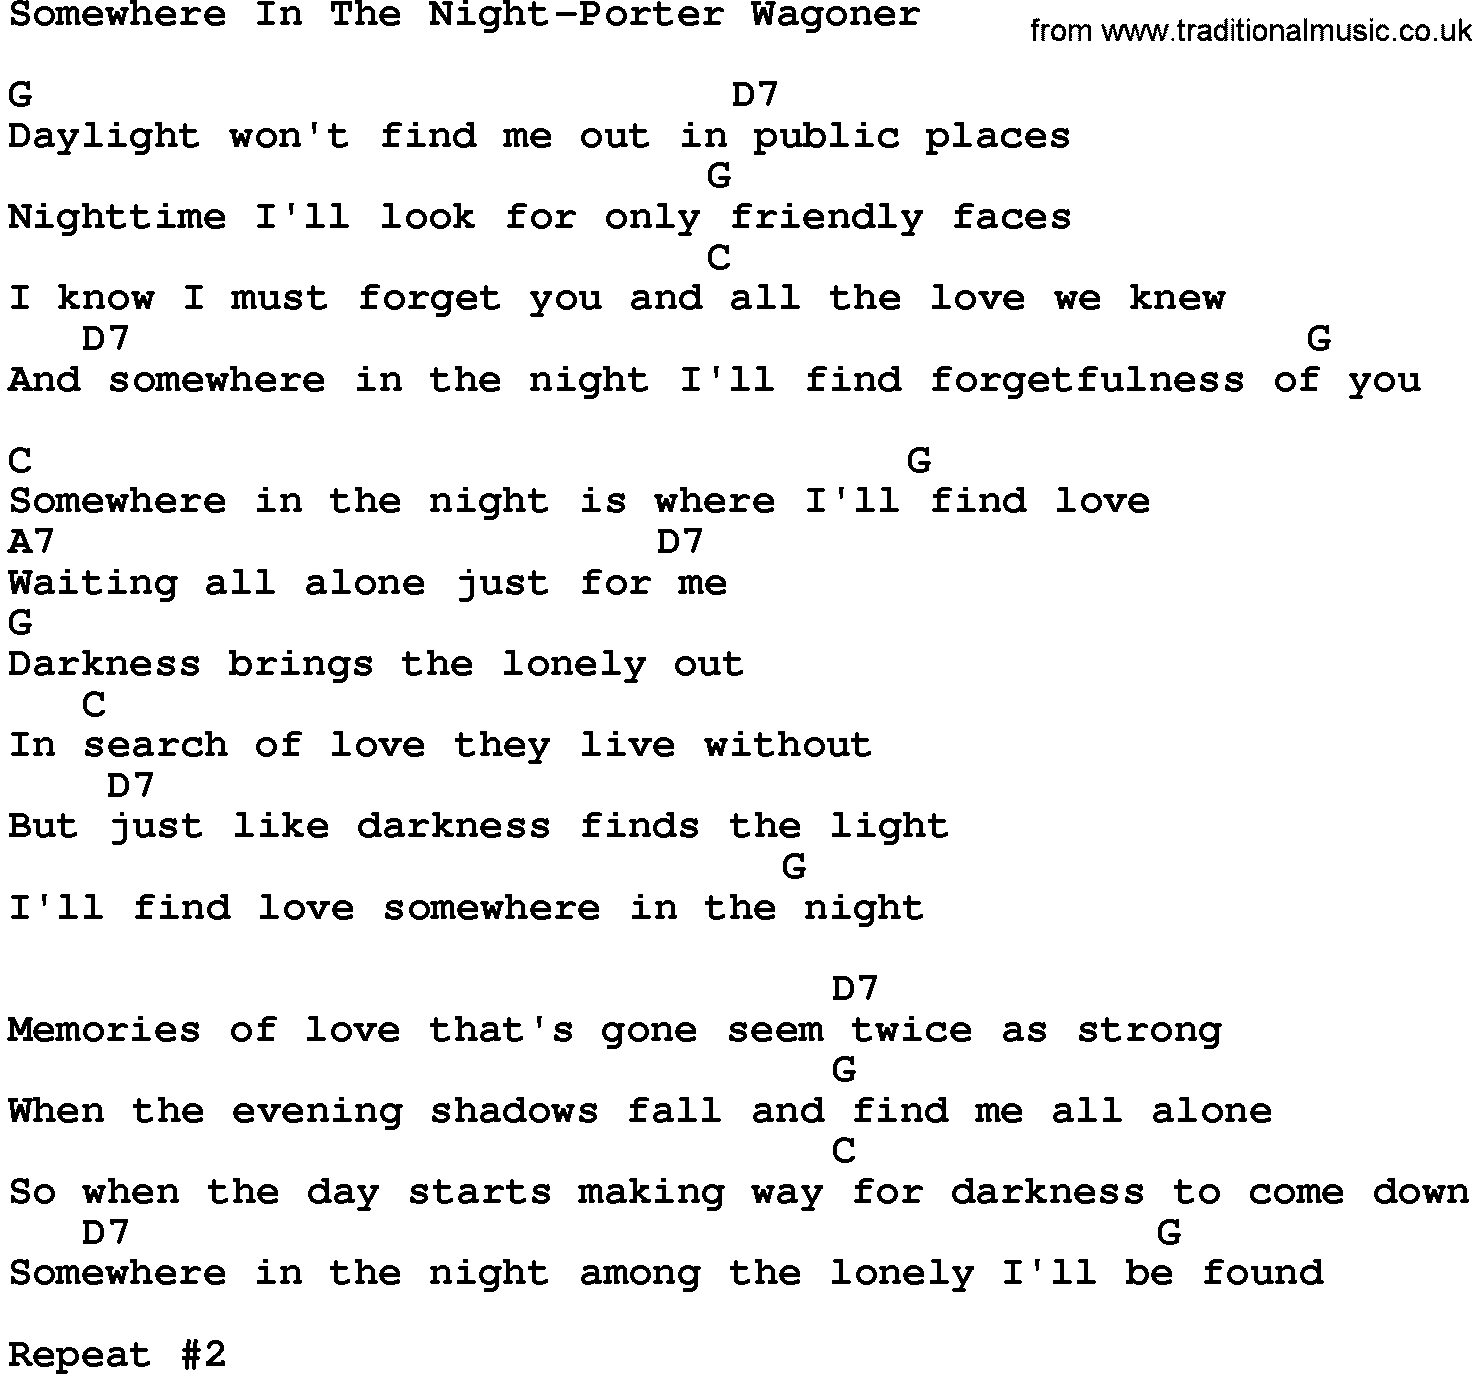 Country music song: Somewhere In The Night-Porter Wagoner lyrics and chords